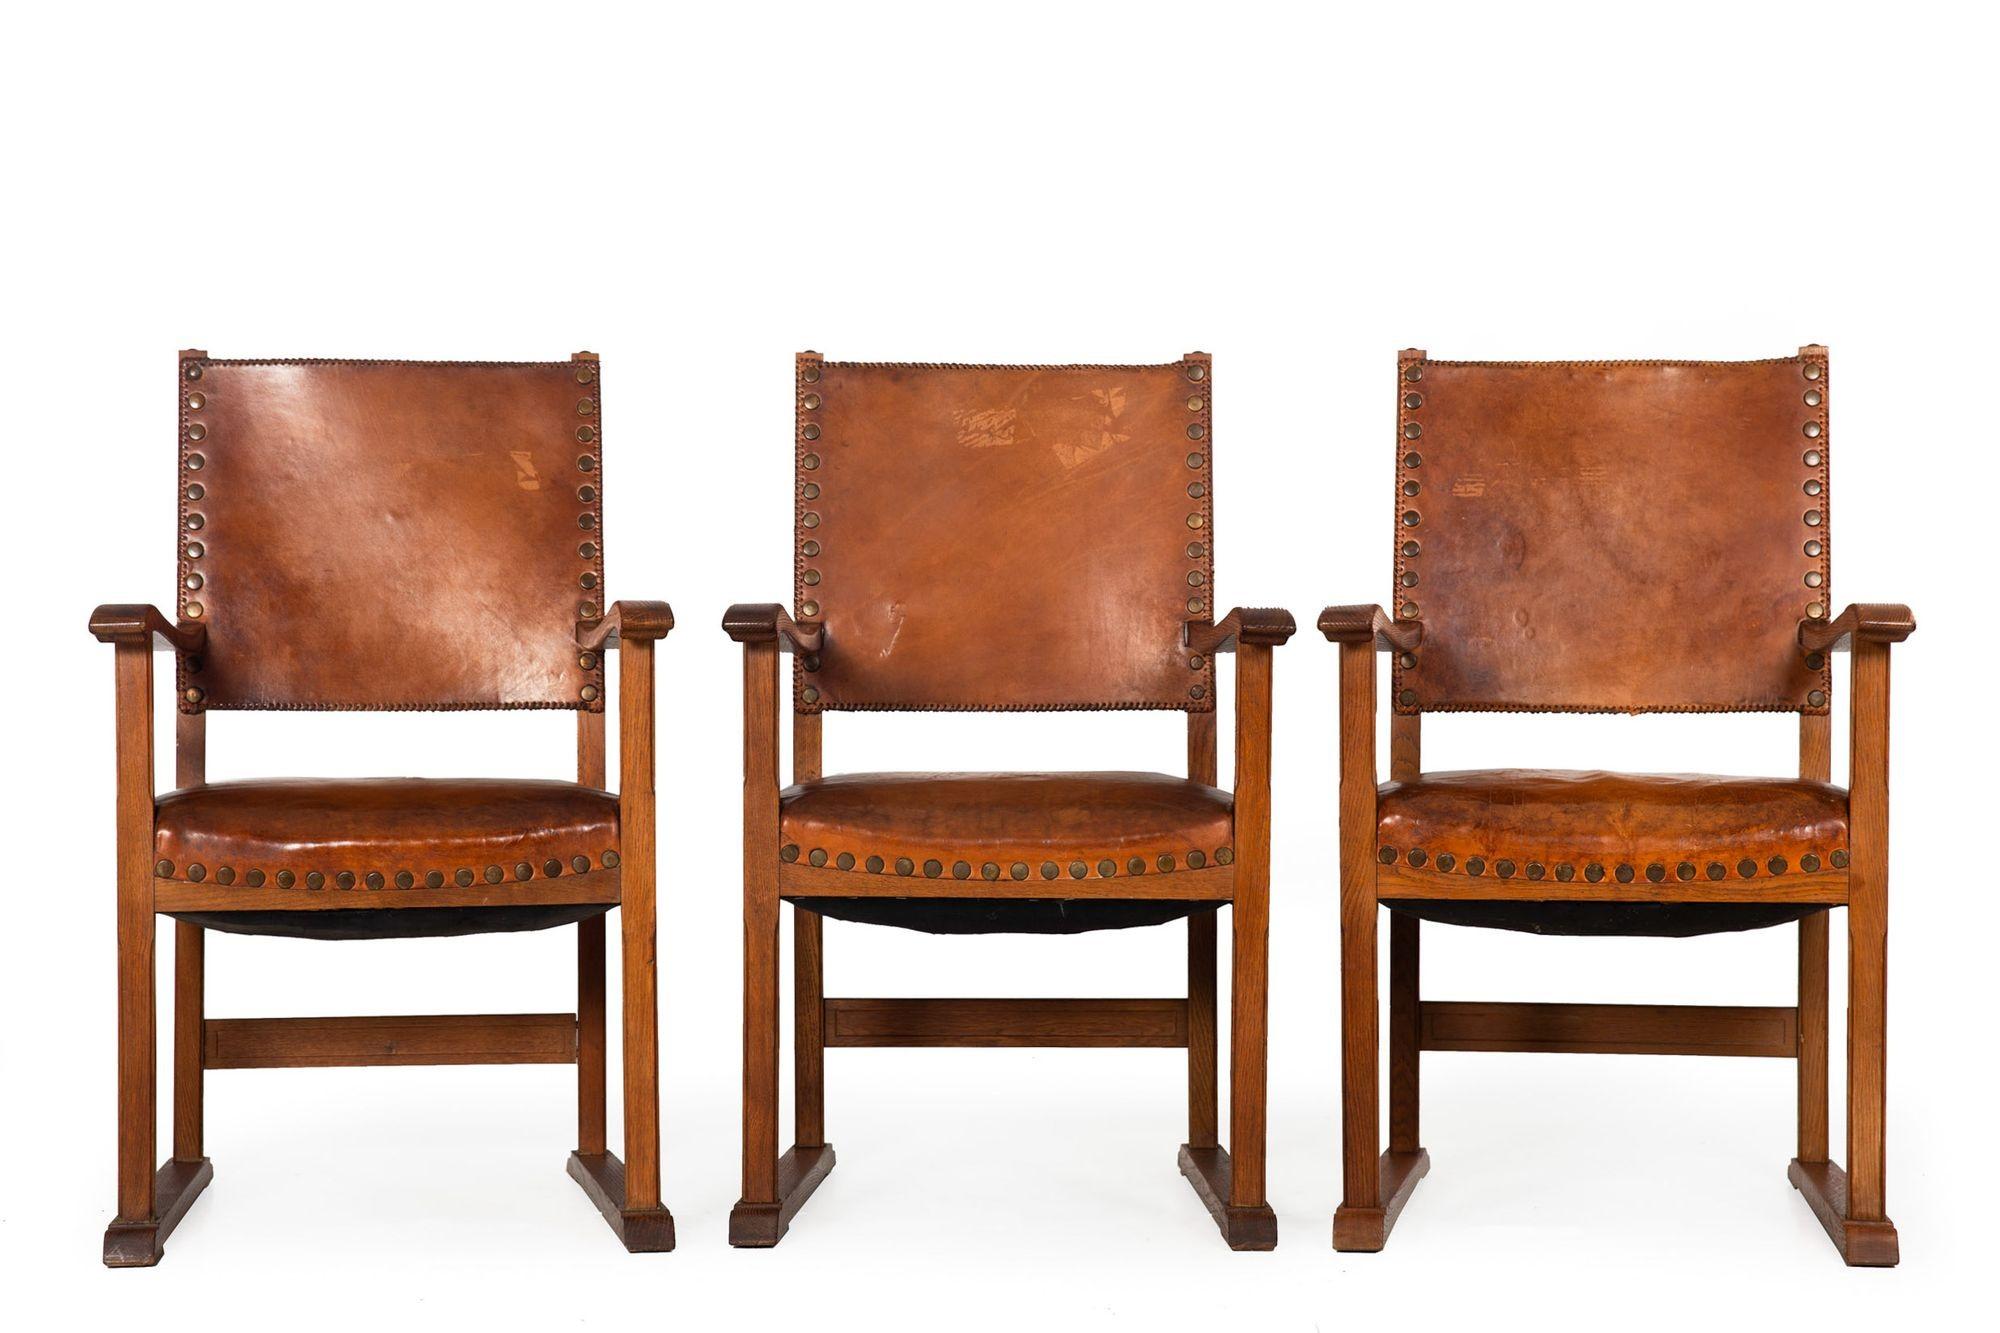 SET OF SIX FRENCH OAK AND COGNAC STITCHED-AND-STUDDED LEATHER DINING CHAIRS
Circa early 20th century
Item # 308ZOG16A

A rich and wonderful set of six dining chairs, they feature wonderful solid oak frames with heavy patinated leather upholstery.